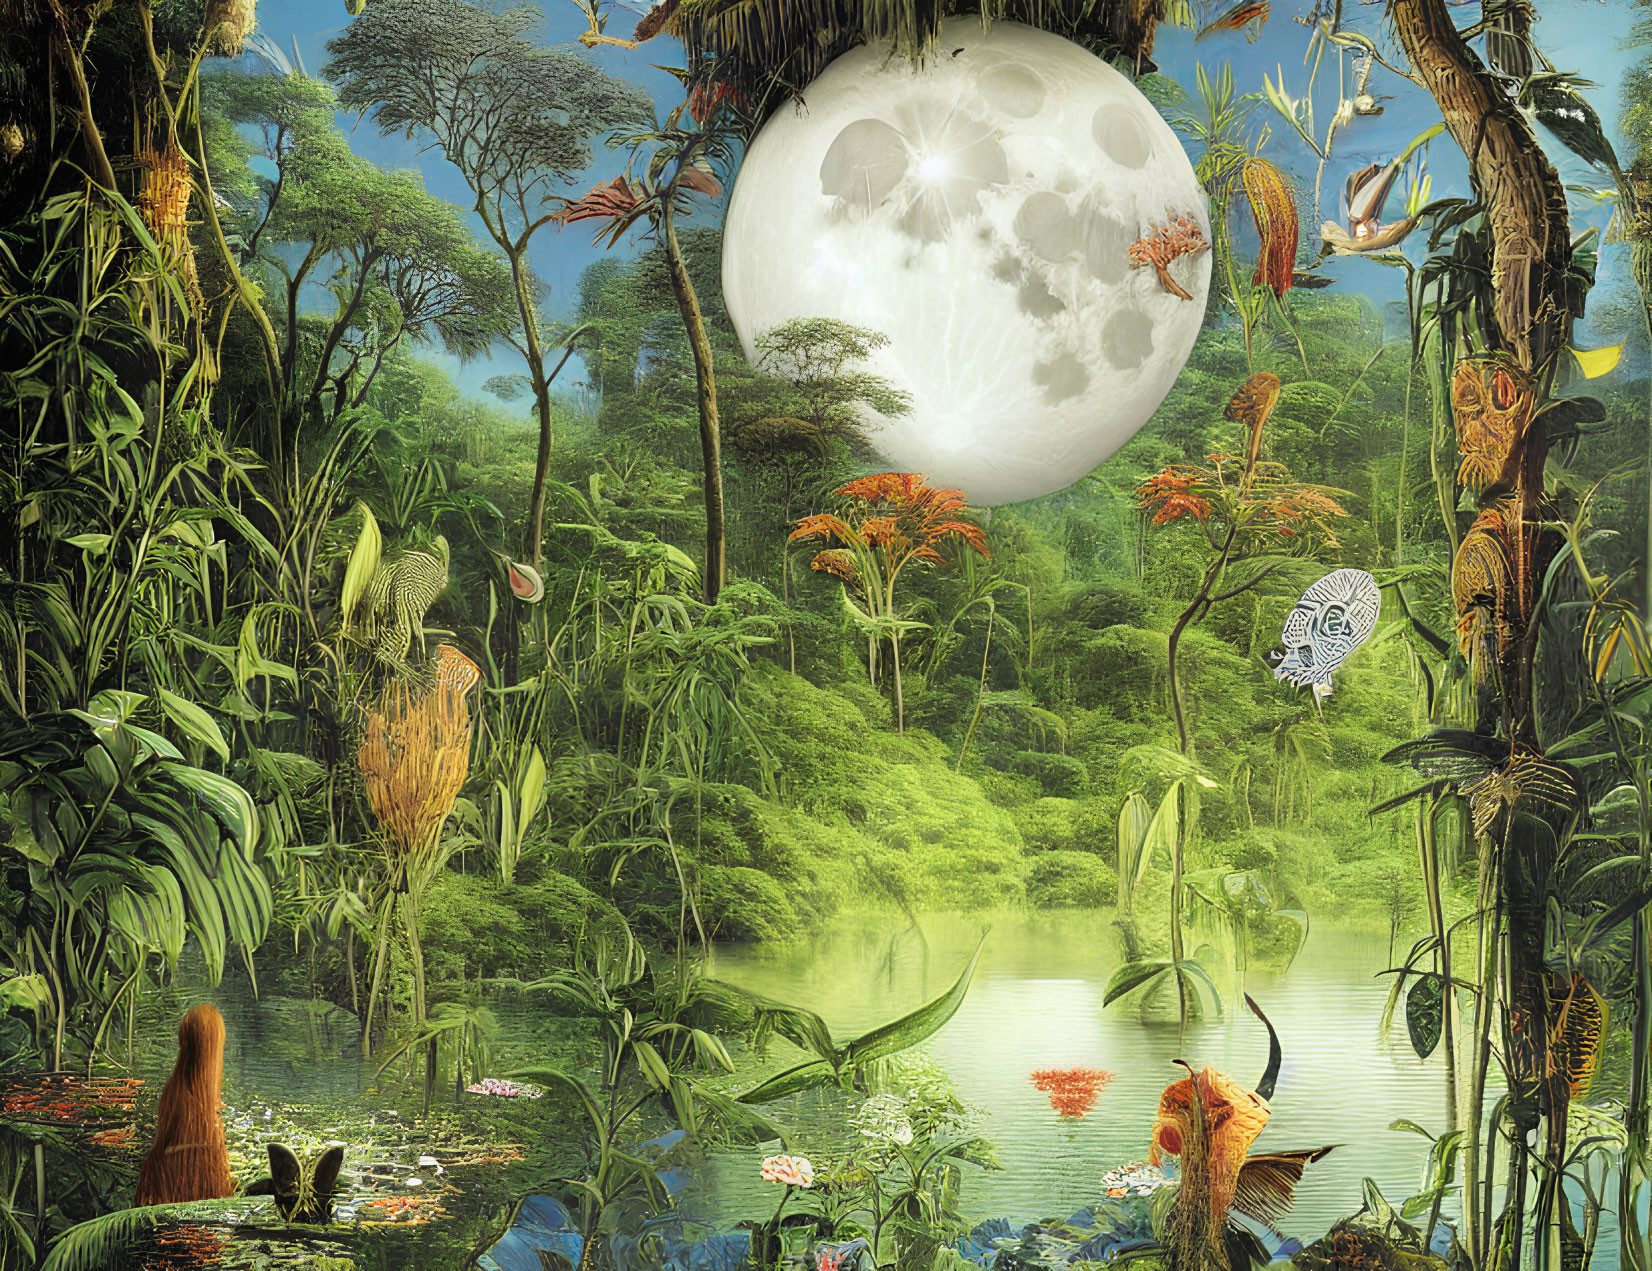 Vibrant fantastical jungle with exotic plants and creatures